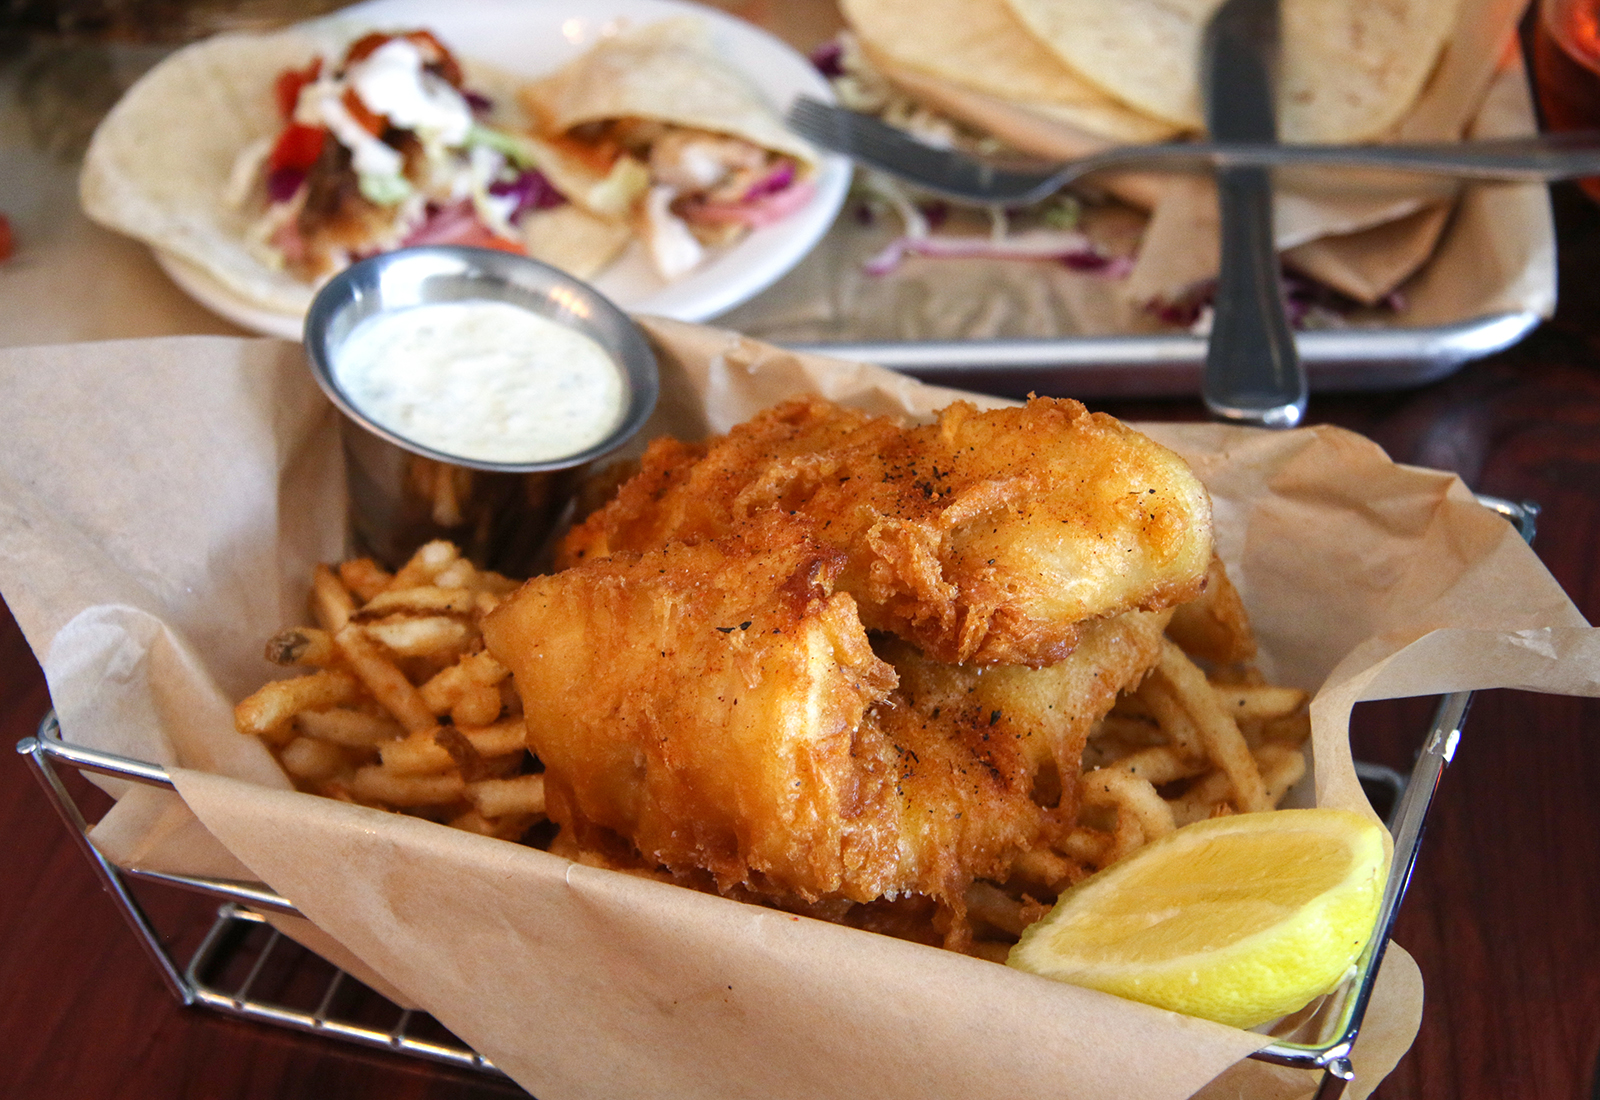 Fish and chips at Reel Fish Shop & Grill in Sonoma. Heather Irwin/PD